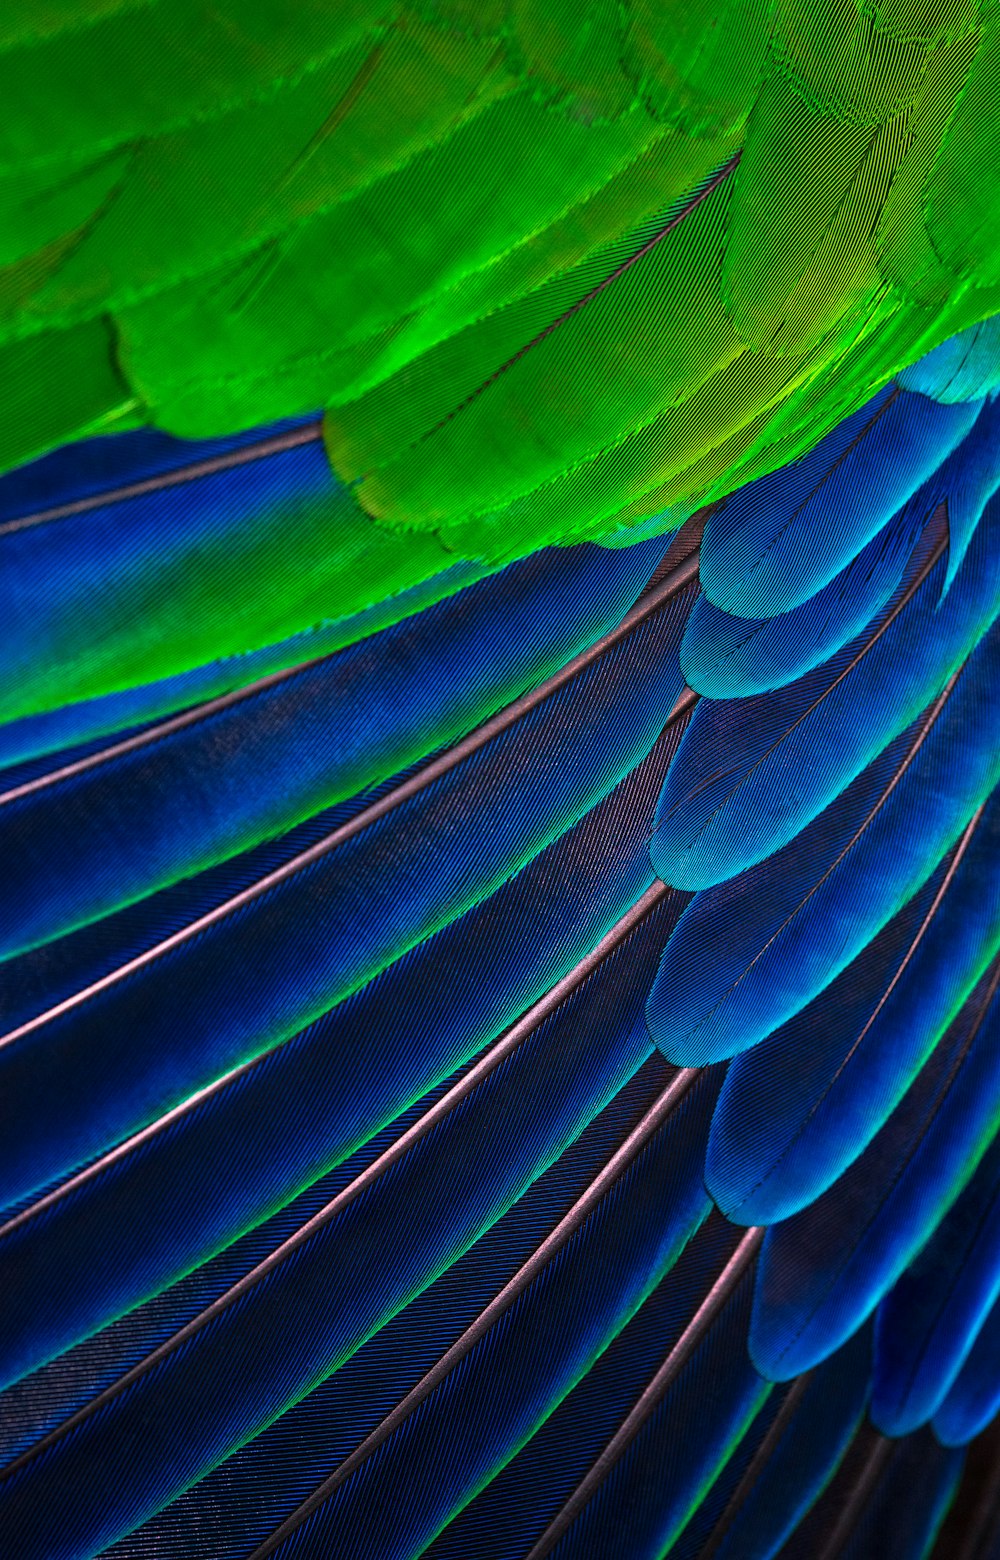 green and blue feather close-up photography